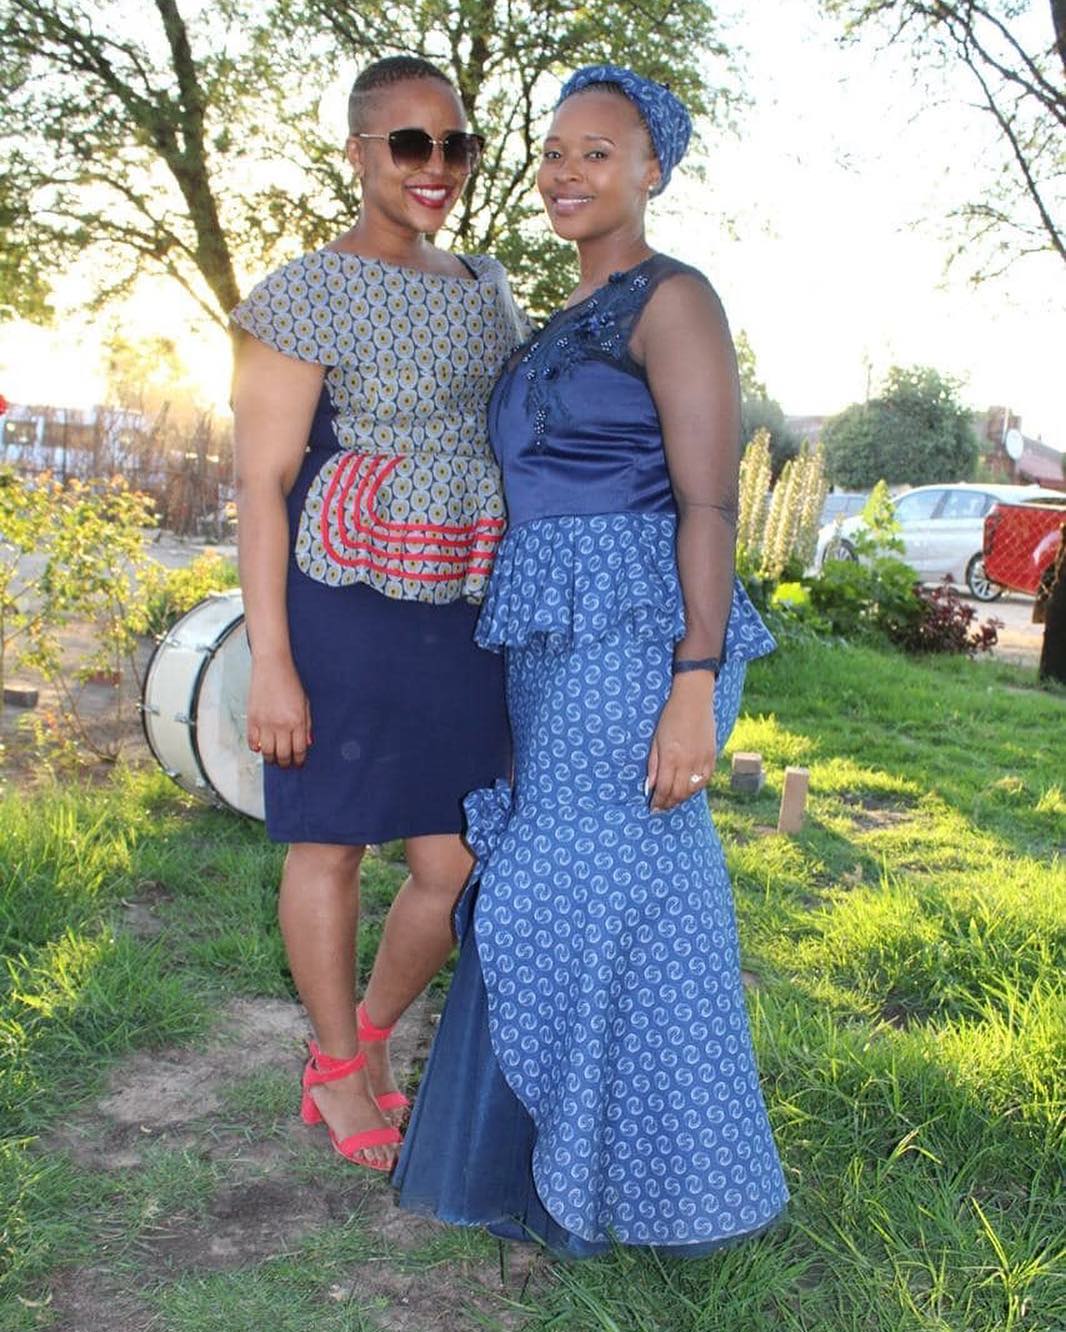 Tswana Traditional Dresses: Embracing Cultural Diversity in Fashion